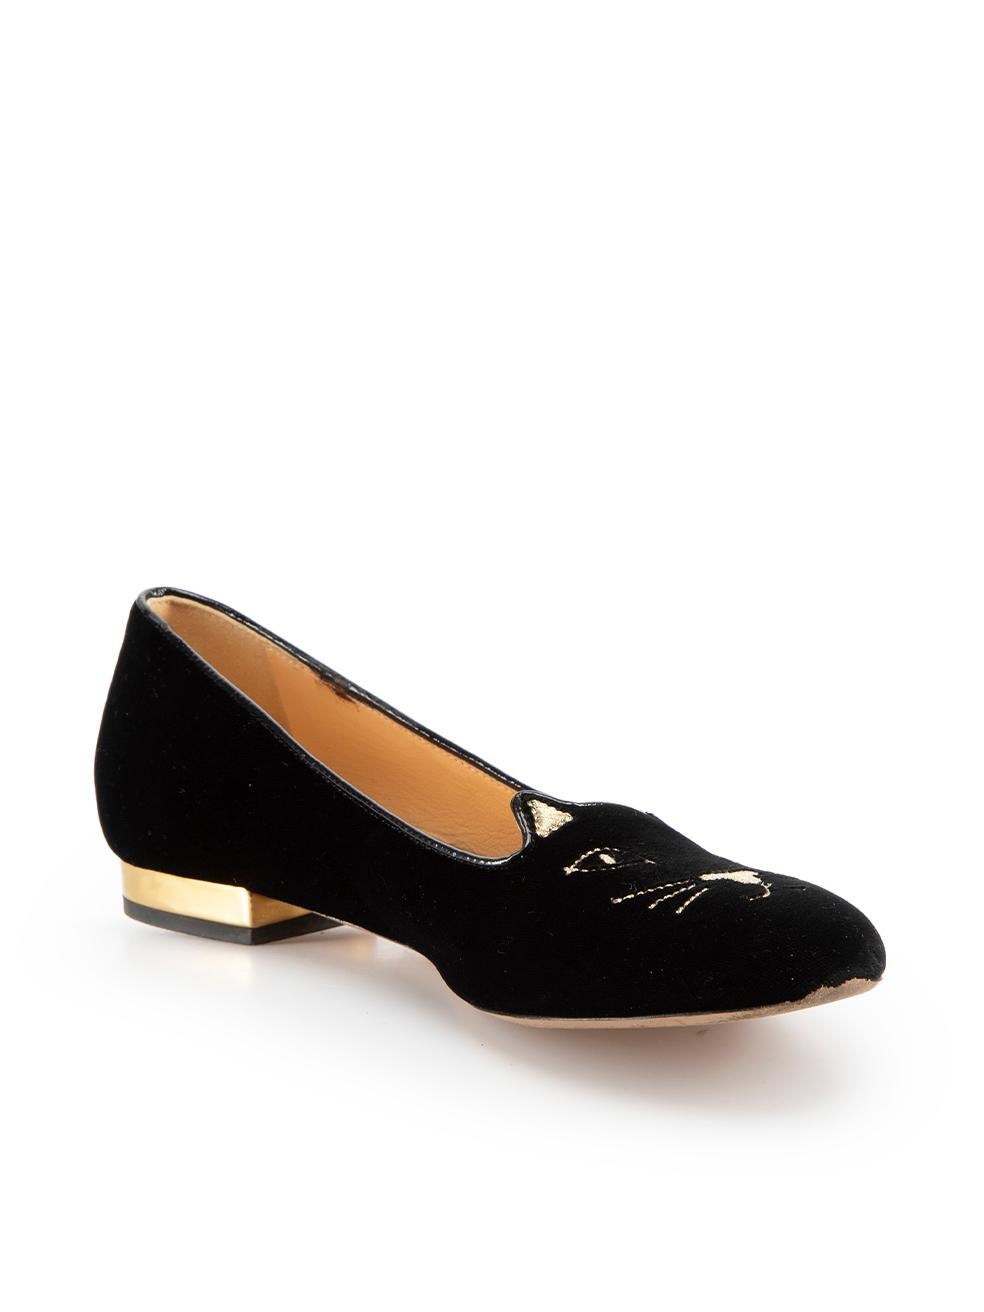 CONDITION is Very good. Minimal wear to flats is evident. Minimal wear to upper with negligible creasing around the topline and over the toe, light scuffing also seen on the soles of this used Charlotte Olympia designer resale